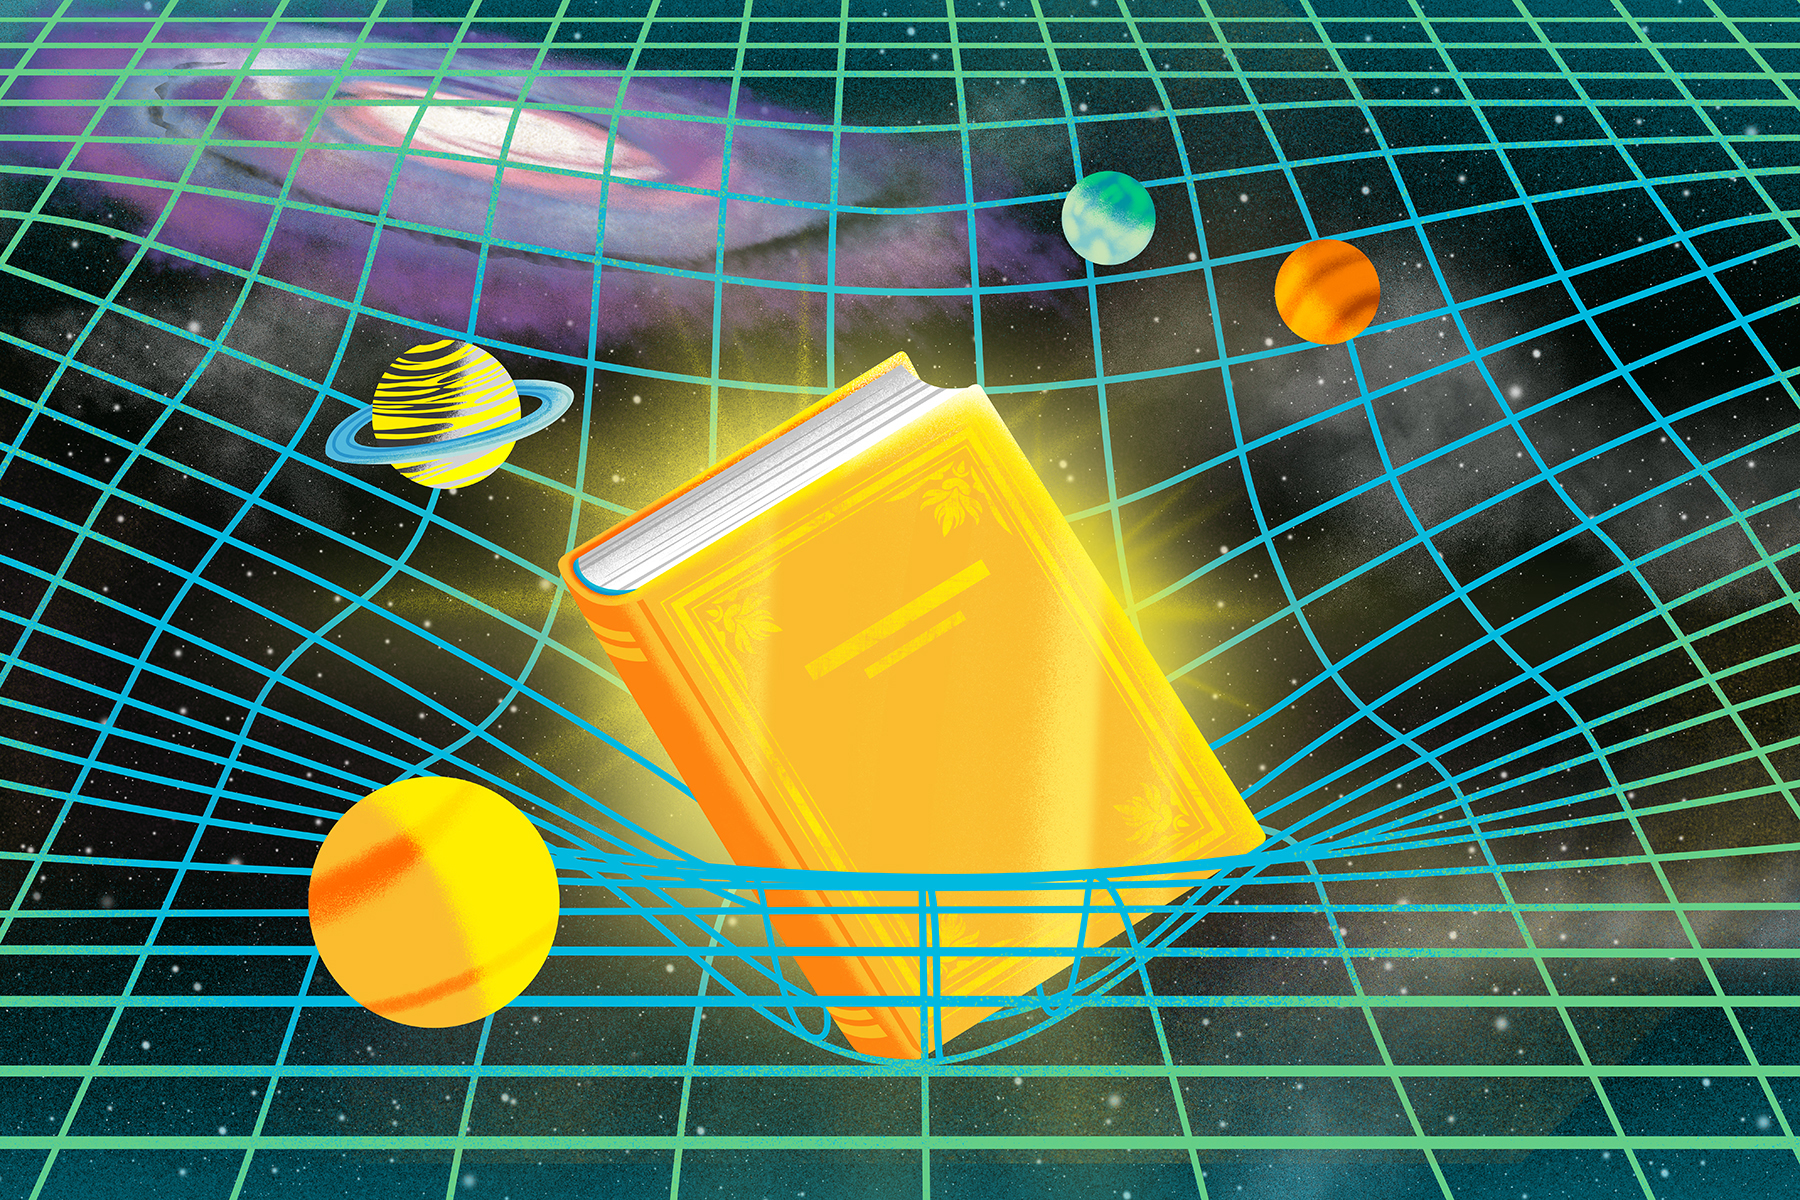 An illustration of a golden book in a gravitational field with galaxies and planets encircling it.